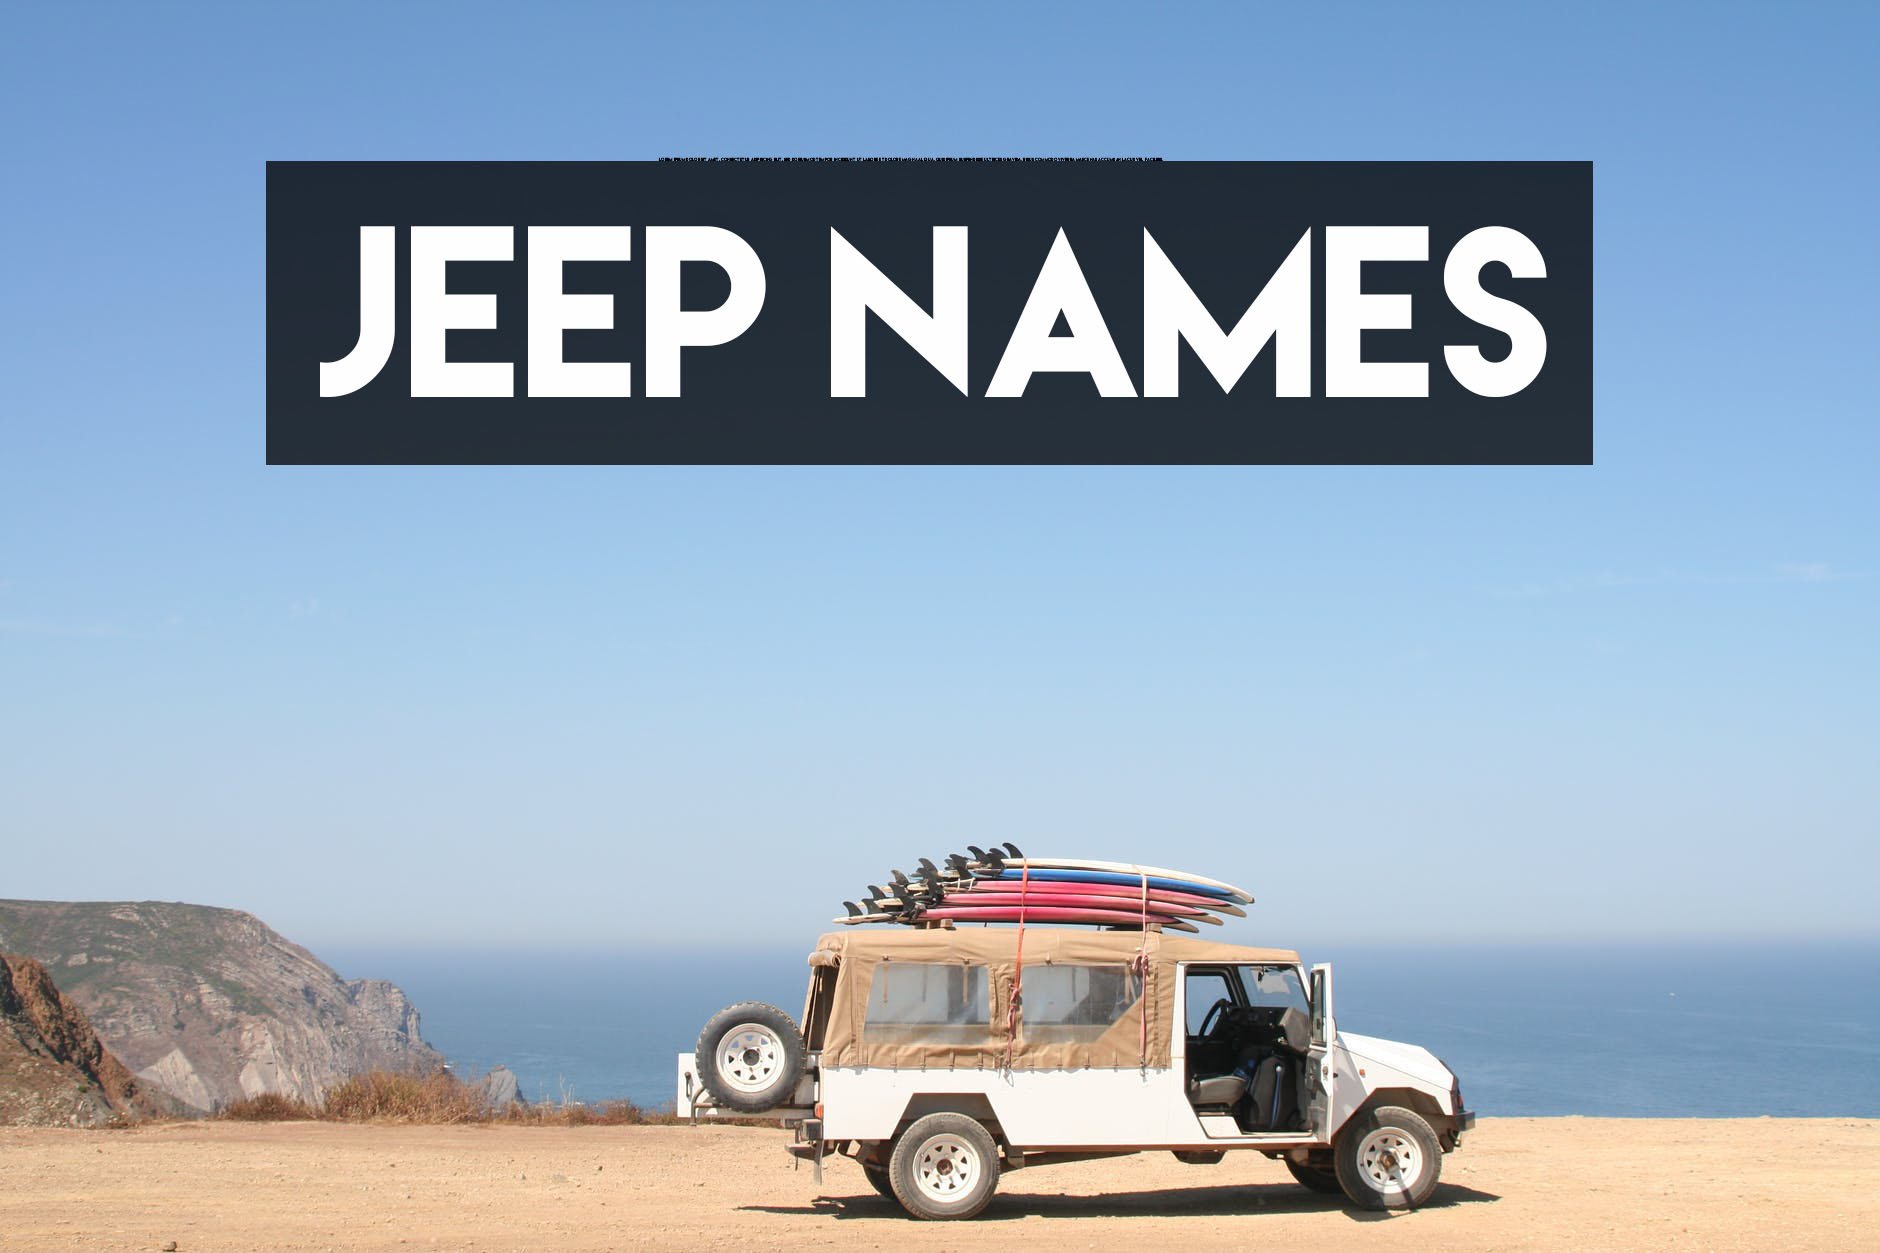 350+ Jeep Names in 2022 that Are Creative, Cool & Funny